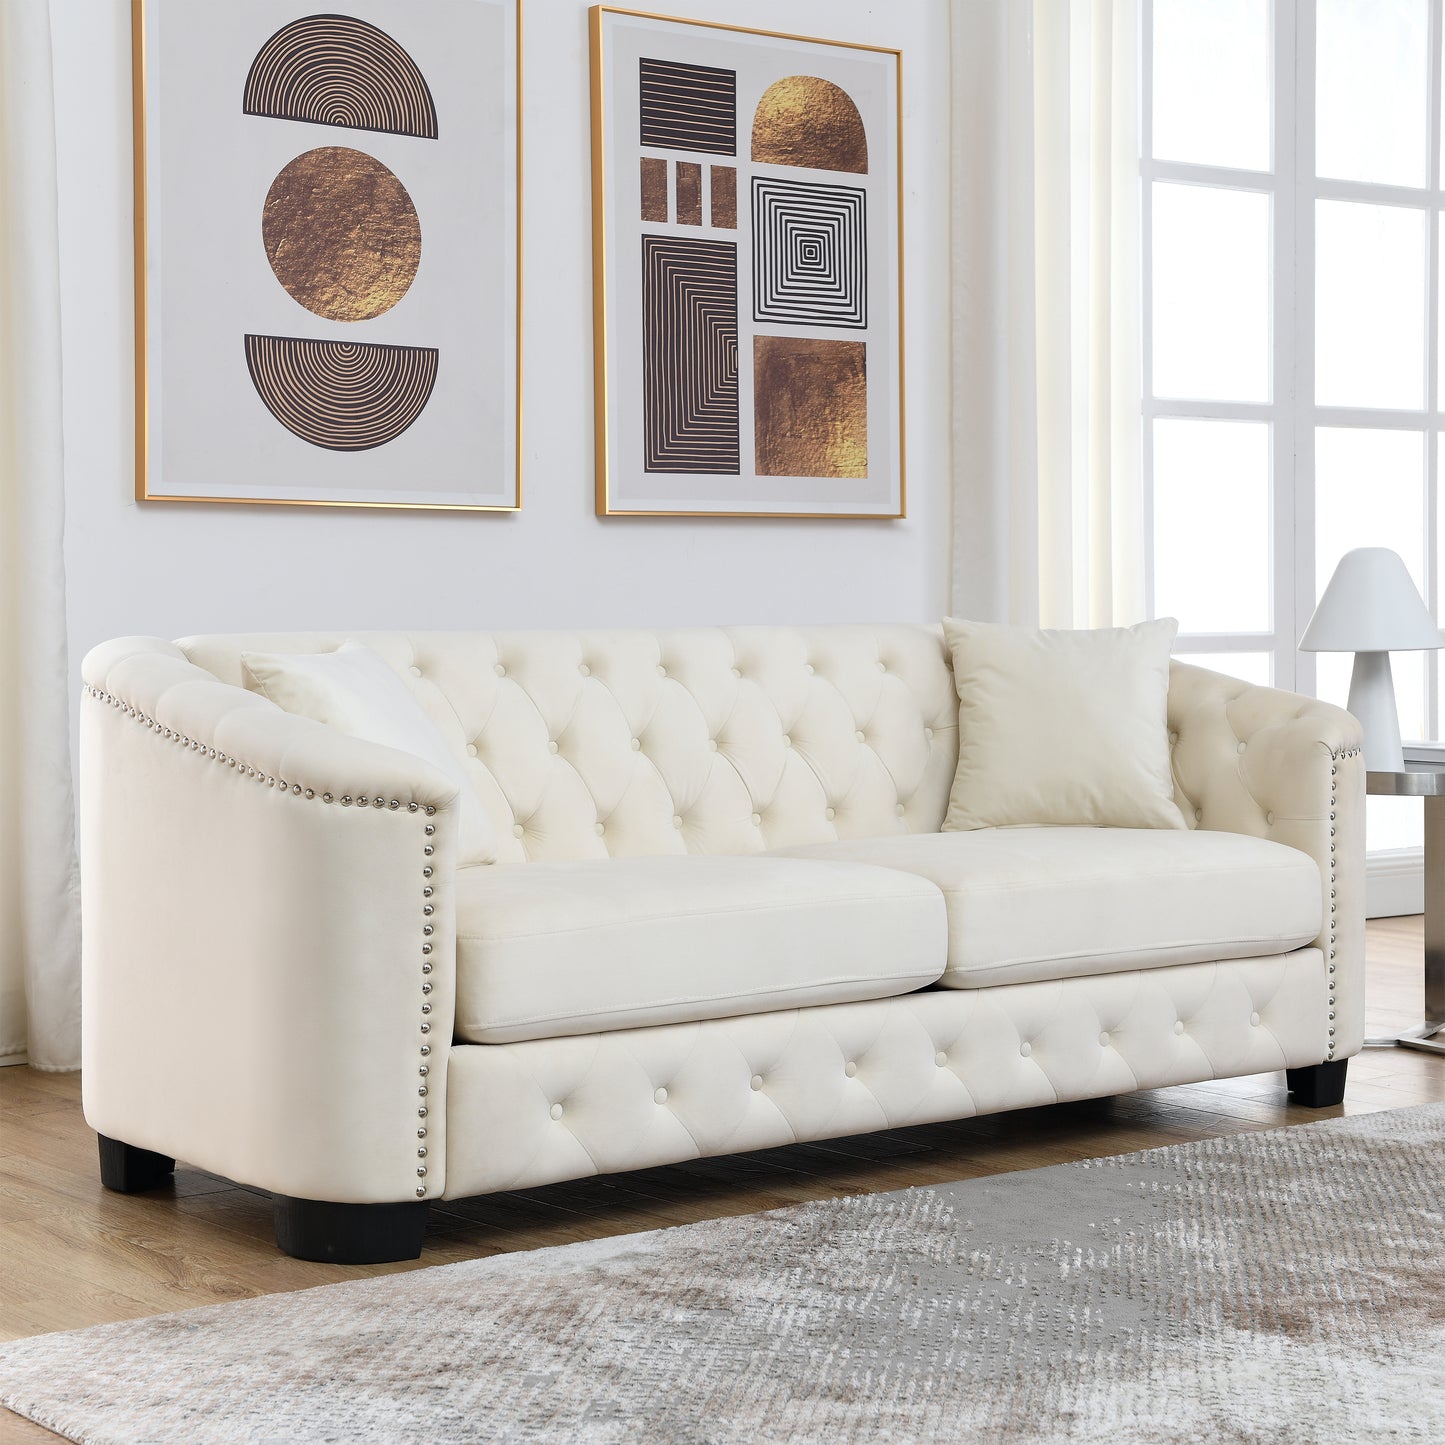 77-Inch Modern Chesterfield Velvet Sofa, 3-Seater Sofa, Upholstered Tufted Backrests with Nailhead Arms and 2 Cushions for Living Room, Bedroom, Apartment, Office (Beige)